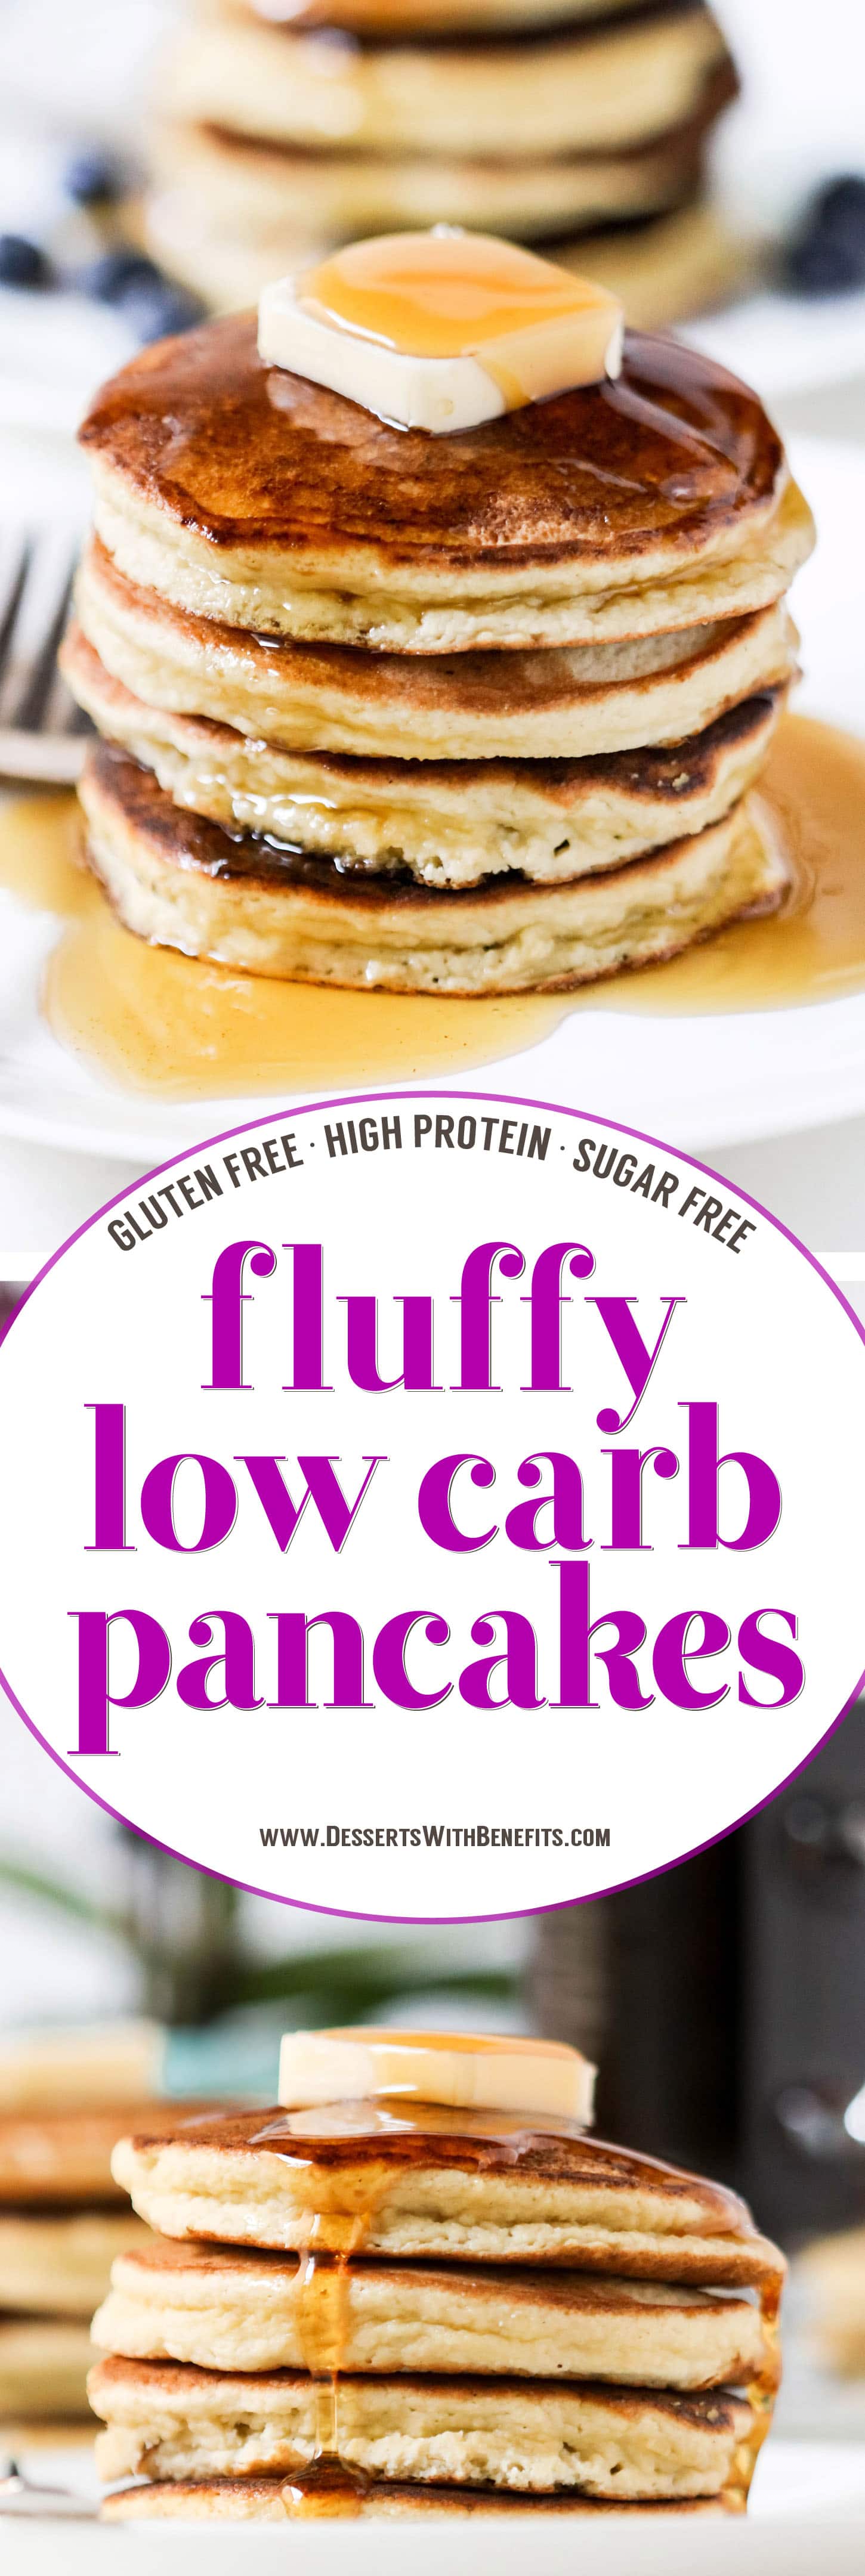 These fluffy Low Carb Coconut Flour Pancakes are THE best way to start your day. One bite and you'll wonder how these Paleo Pancakes are sugar free, low carb, high protein, high fiber, gluten free, and dairy free! These filling Low Carb Pancakes have just 220 calories plus 15g of protein and no sugar added. This is a breakfast we can feel good about indulging in.